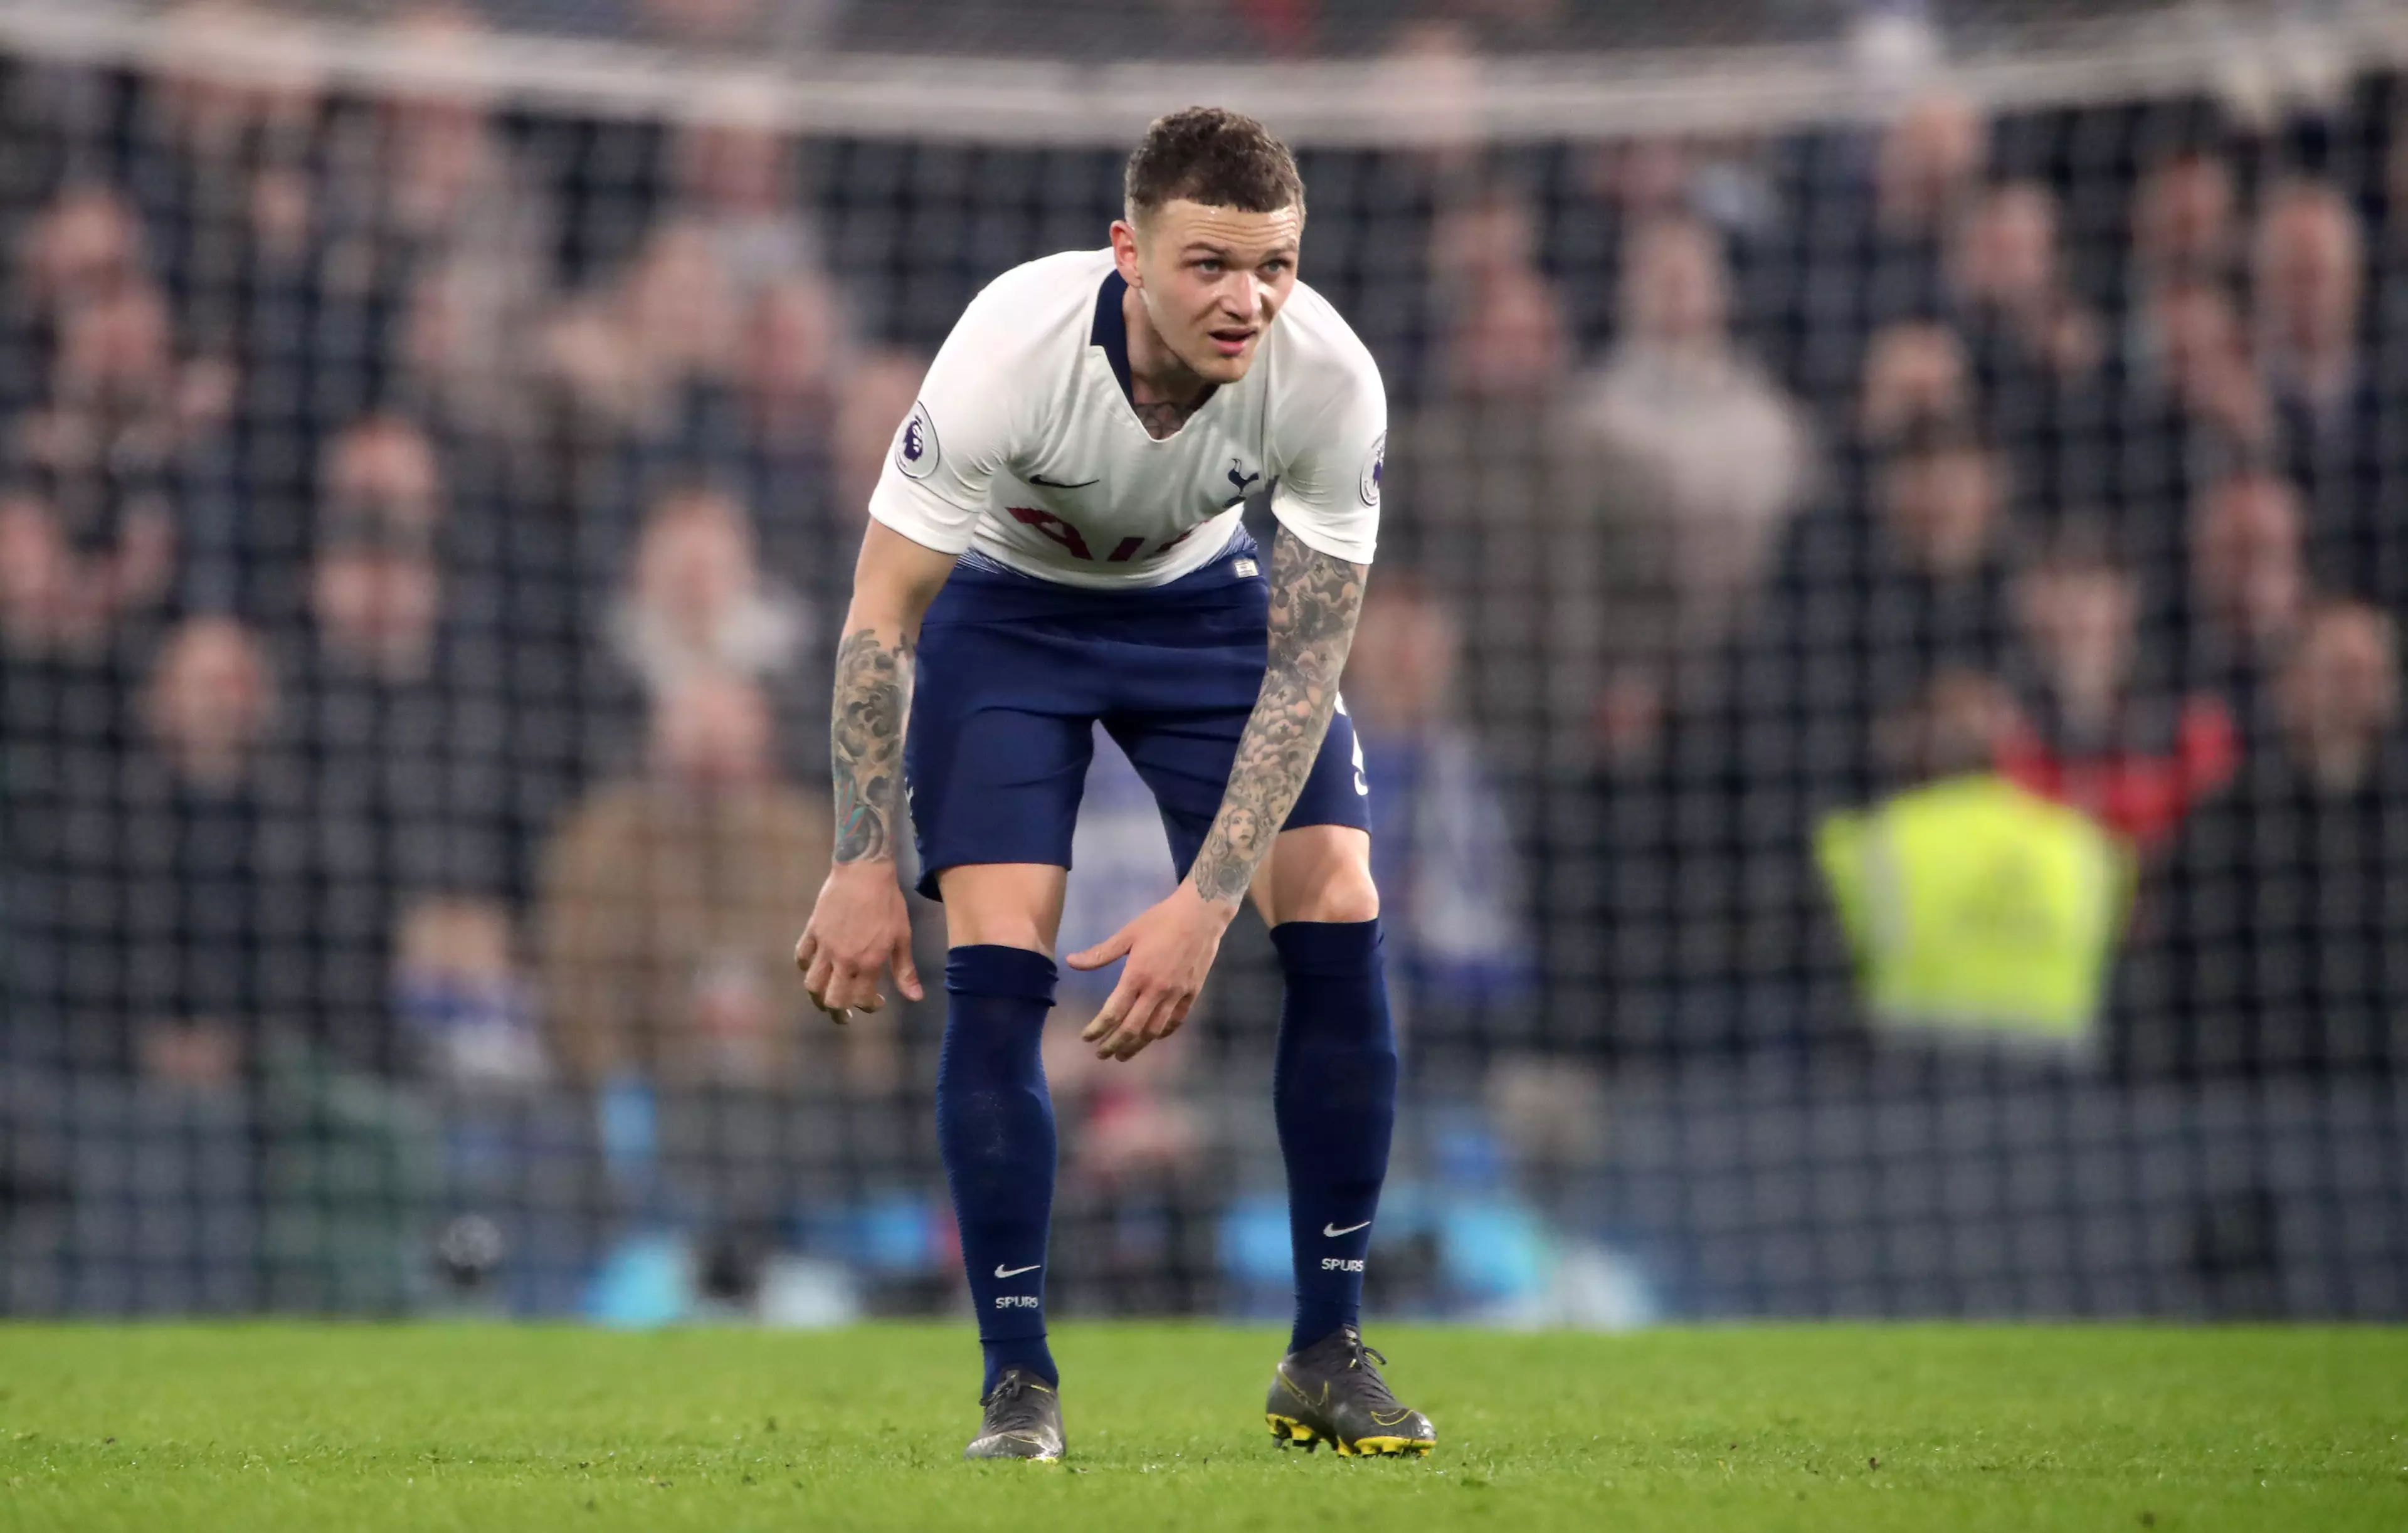 Trippier has been poor this season. Image: PA Images